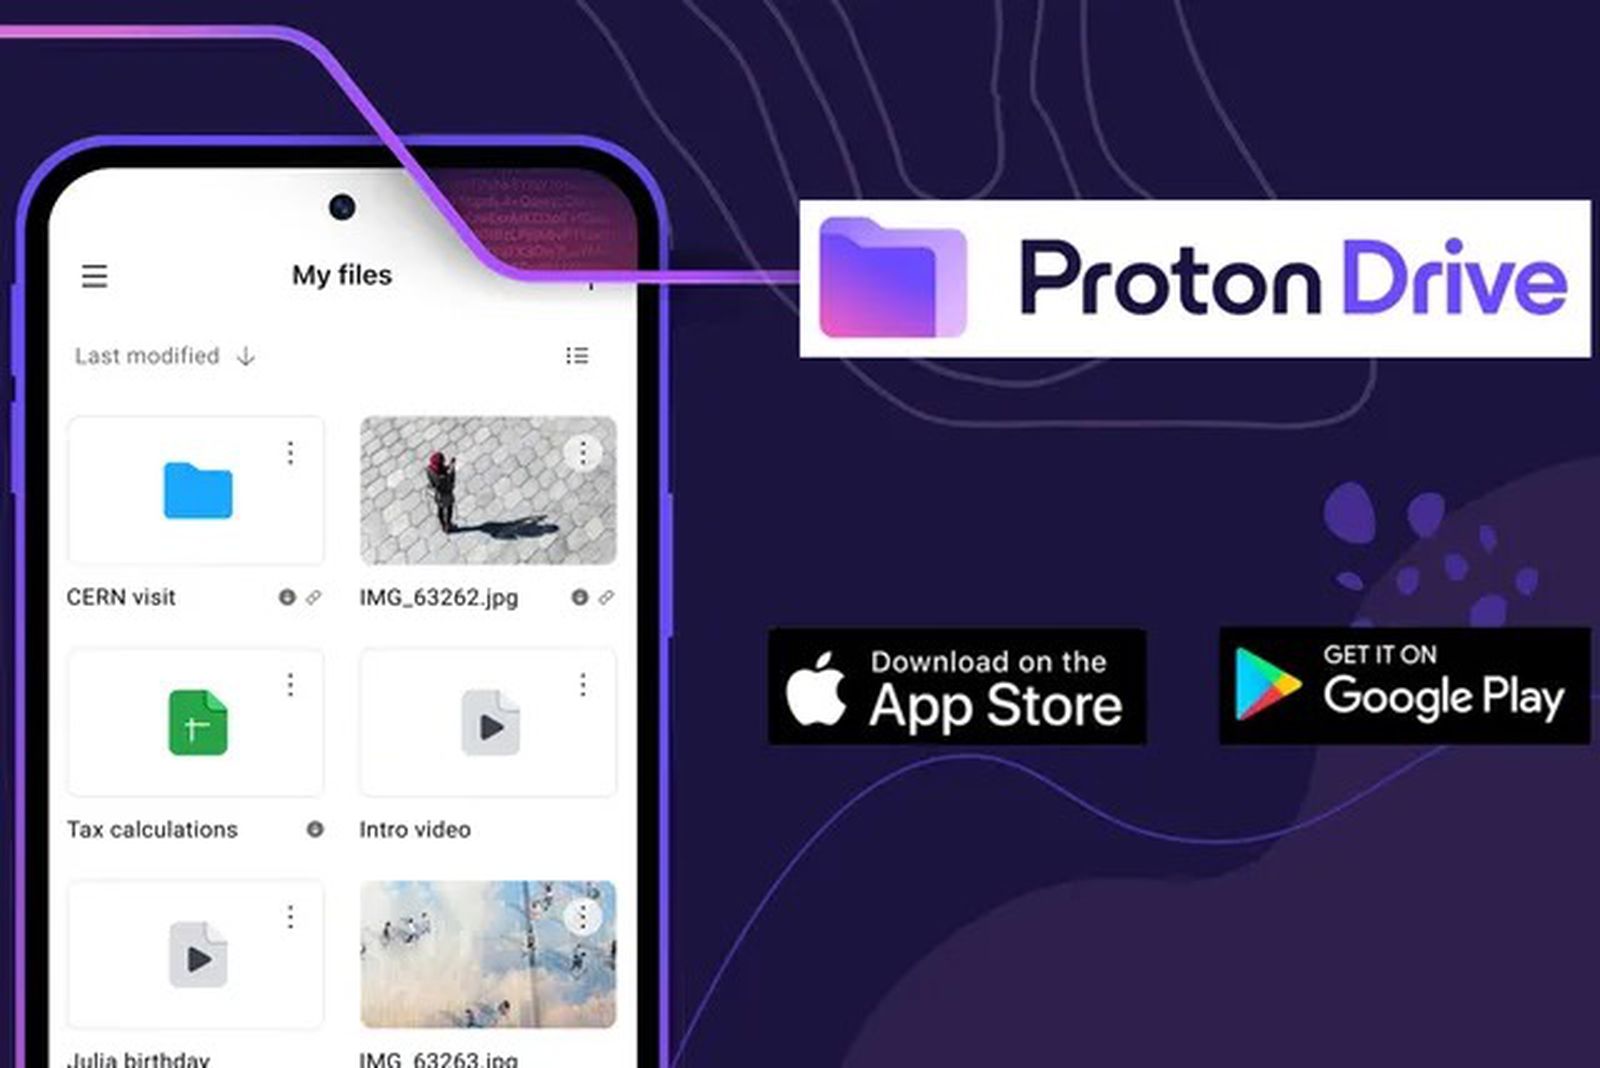 Proton Drive iOS and Android Apps Now Available for Encrypted Cloud